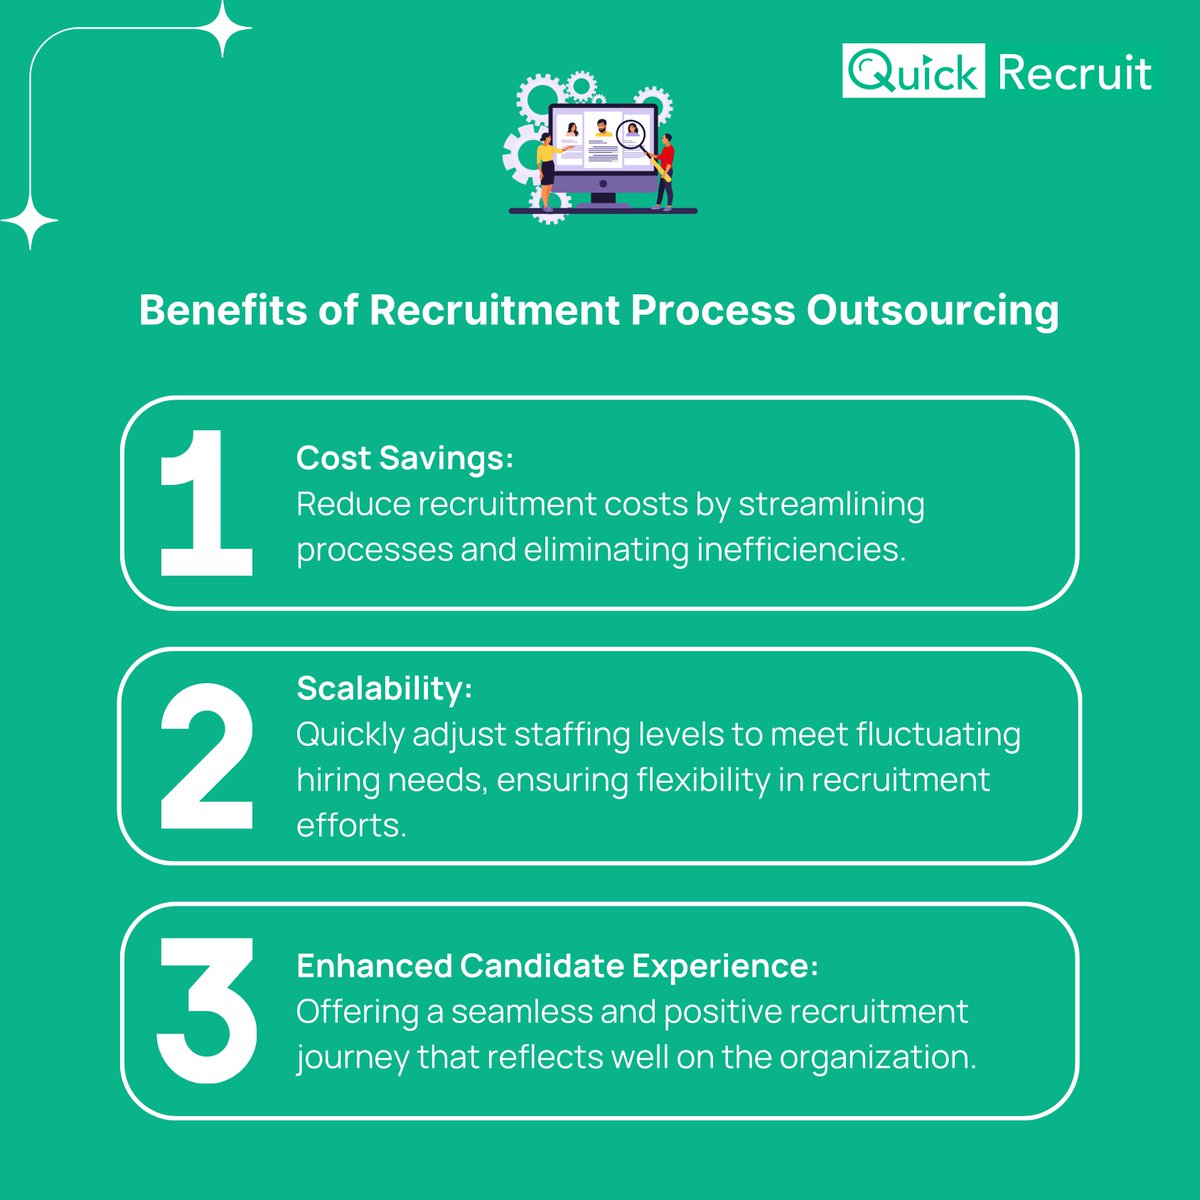 Unlock the Benefits of Recruitment Process Outsourcing! 
Streamline Your Interview Process with QuickRecruit: rb.gy/7fy1ey 
#recruitment #recruitmentsupport #EfficiencyBoost #interviewasaservice #virtualinterview #quickrecruit